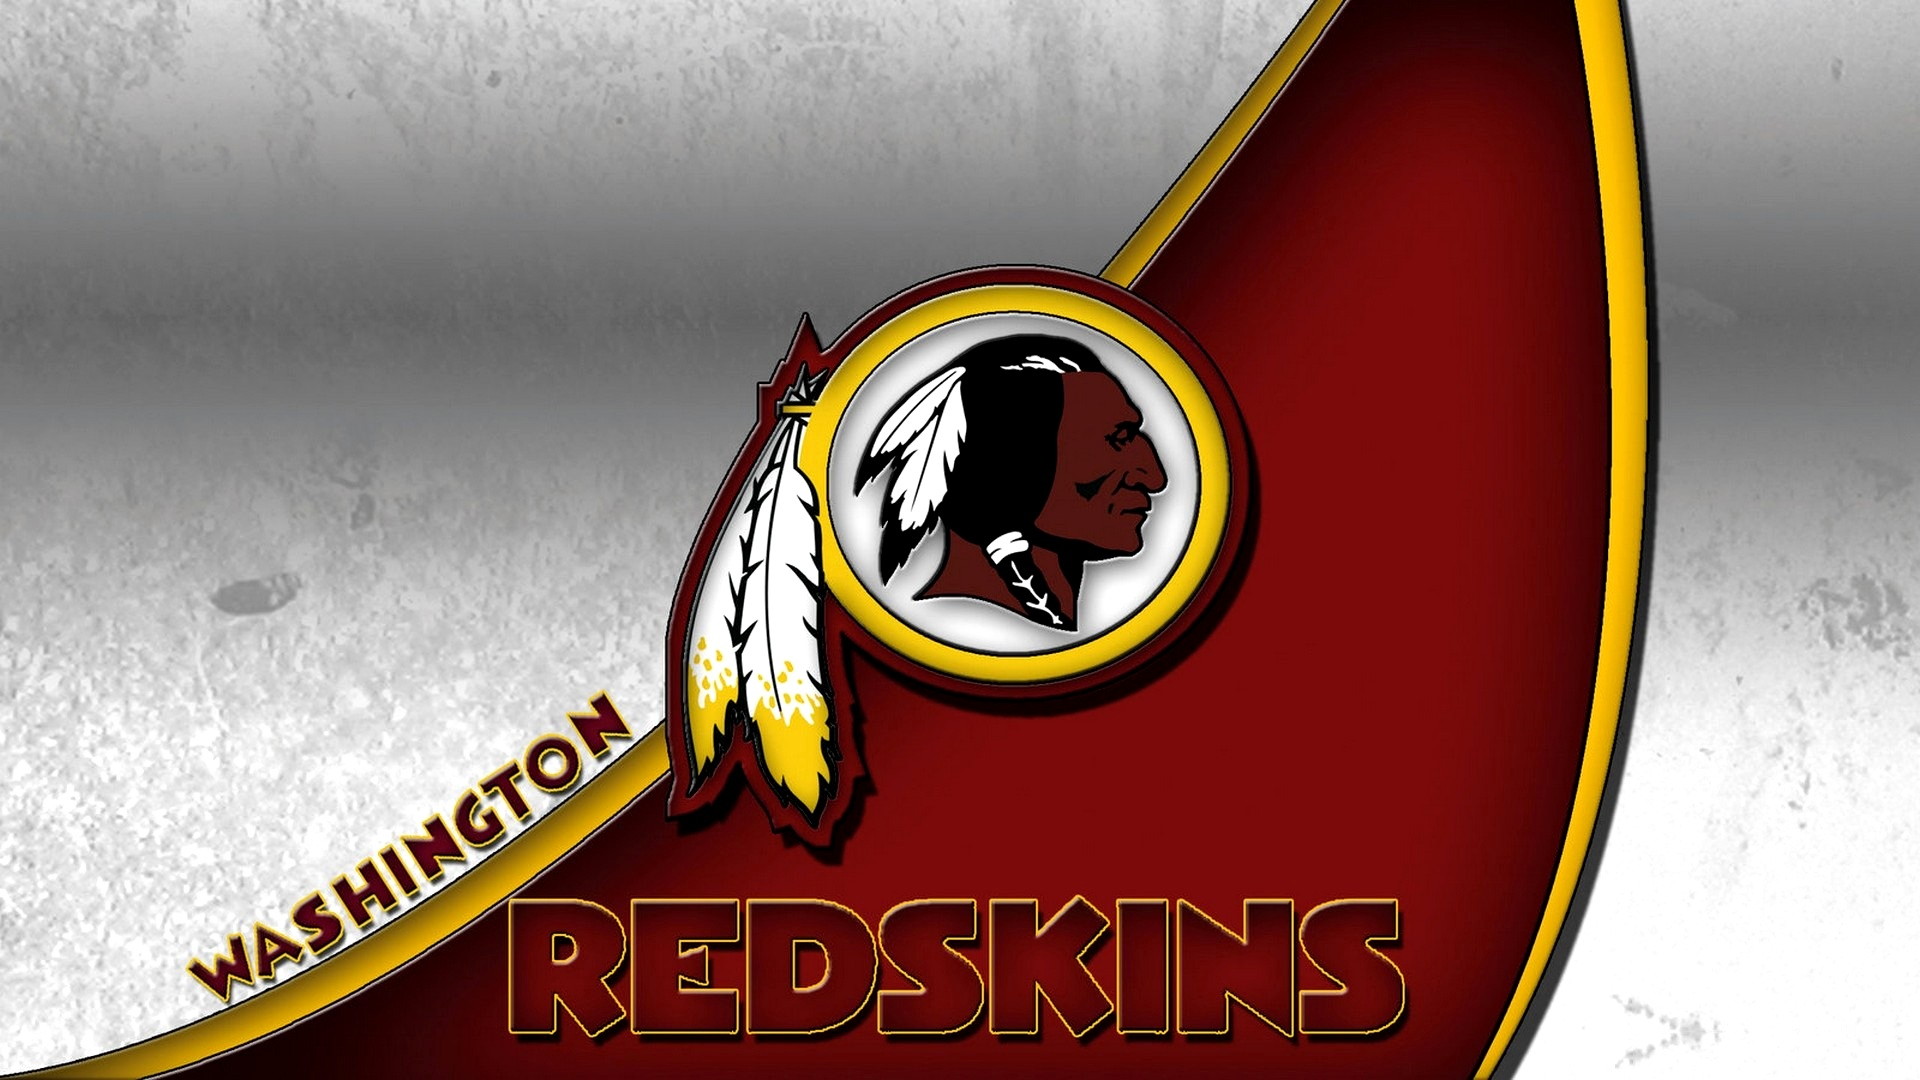 Washington Redskins NFL Mac Wallpaper with high-resolution 1920x1080 pixel. You can use and set as wallpaper for Notebook Screensavers, Mac Wallpapers, Mobile Home Screen, iPhone or Android Phones Lock Screen